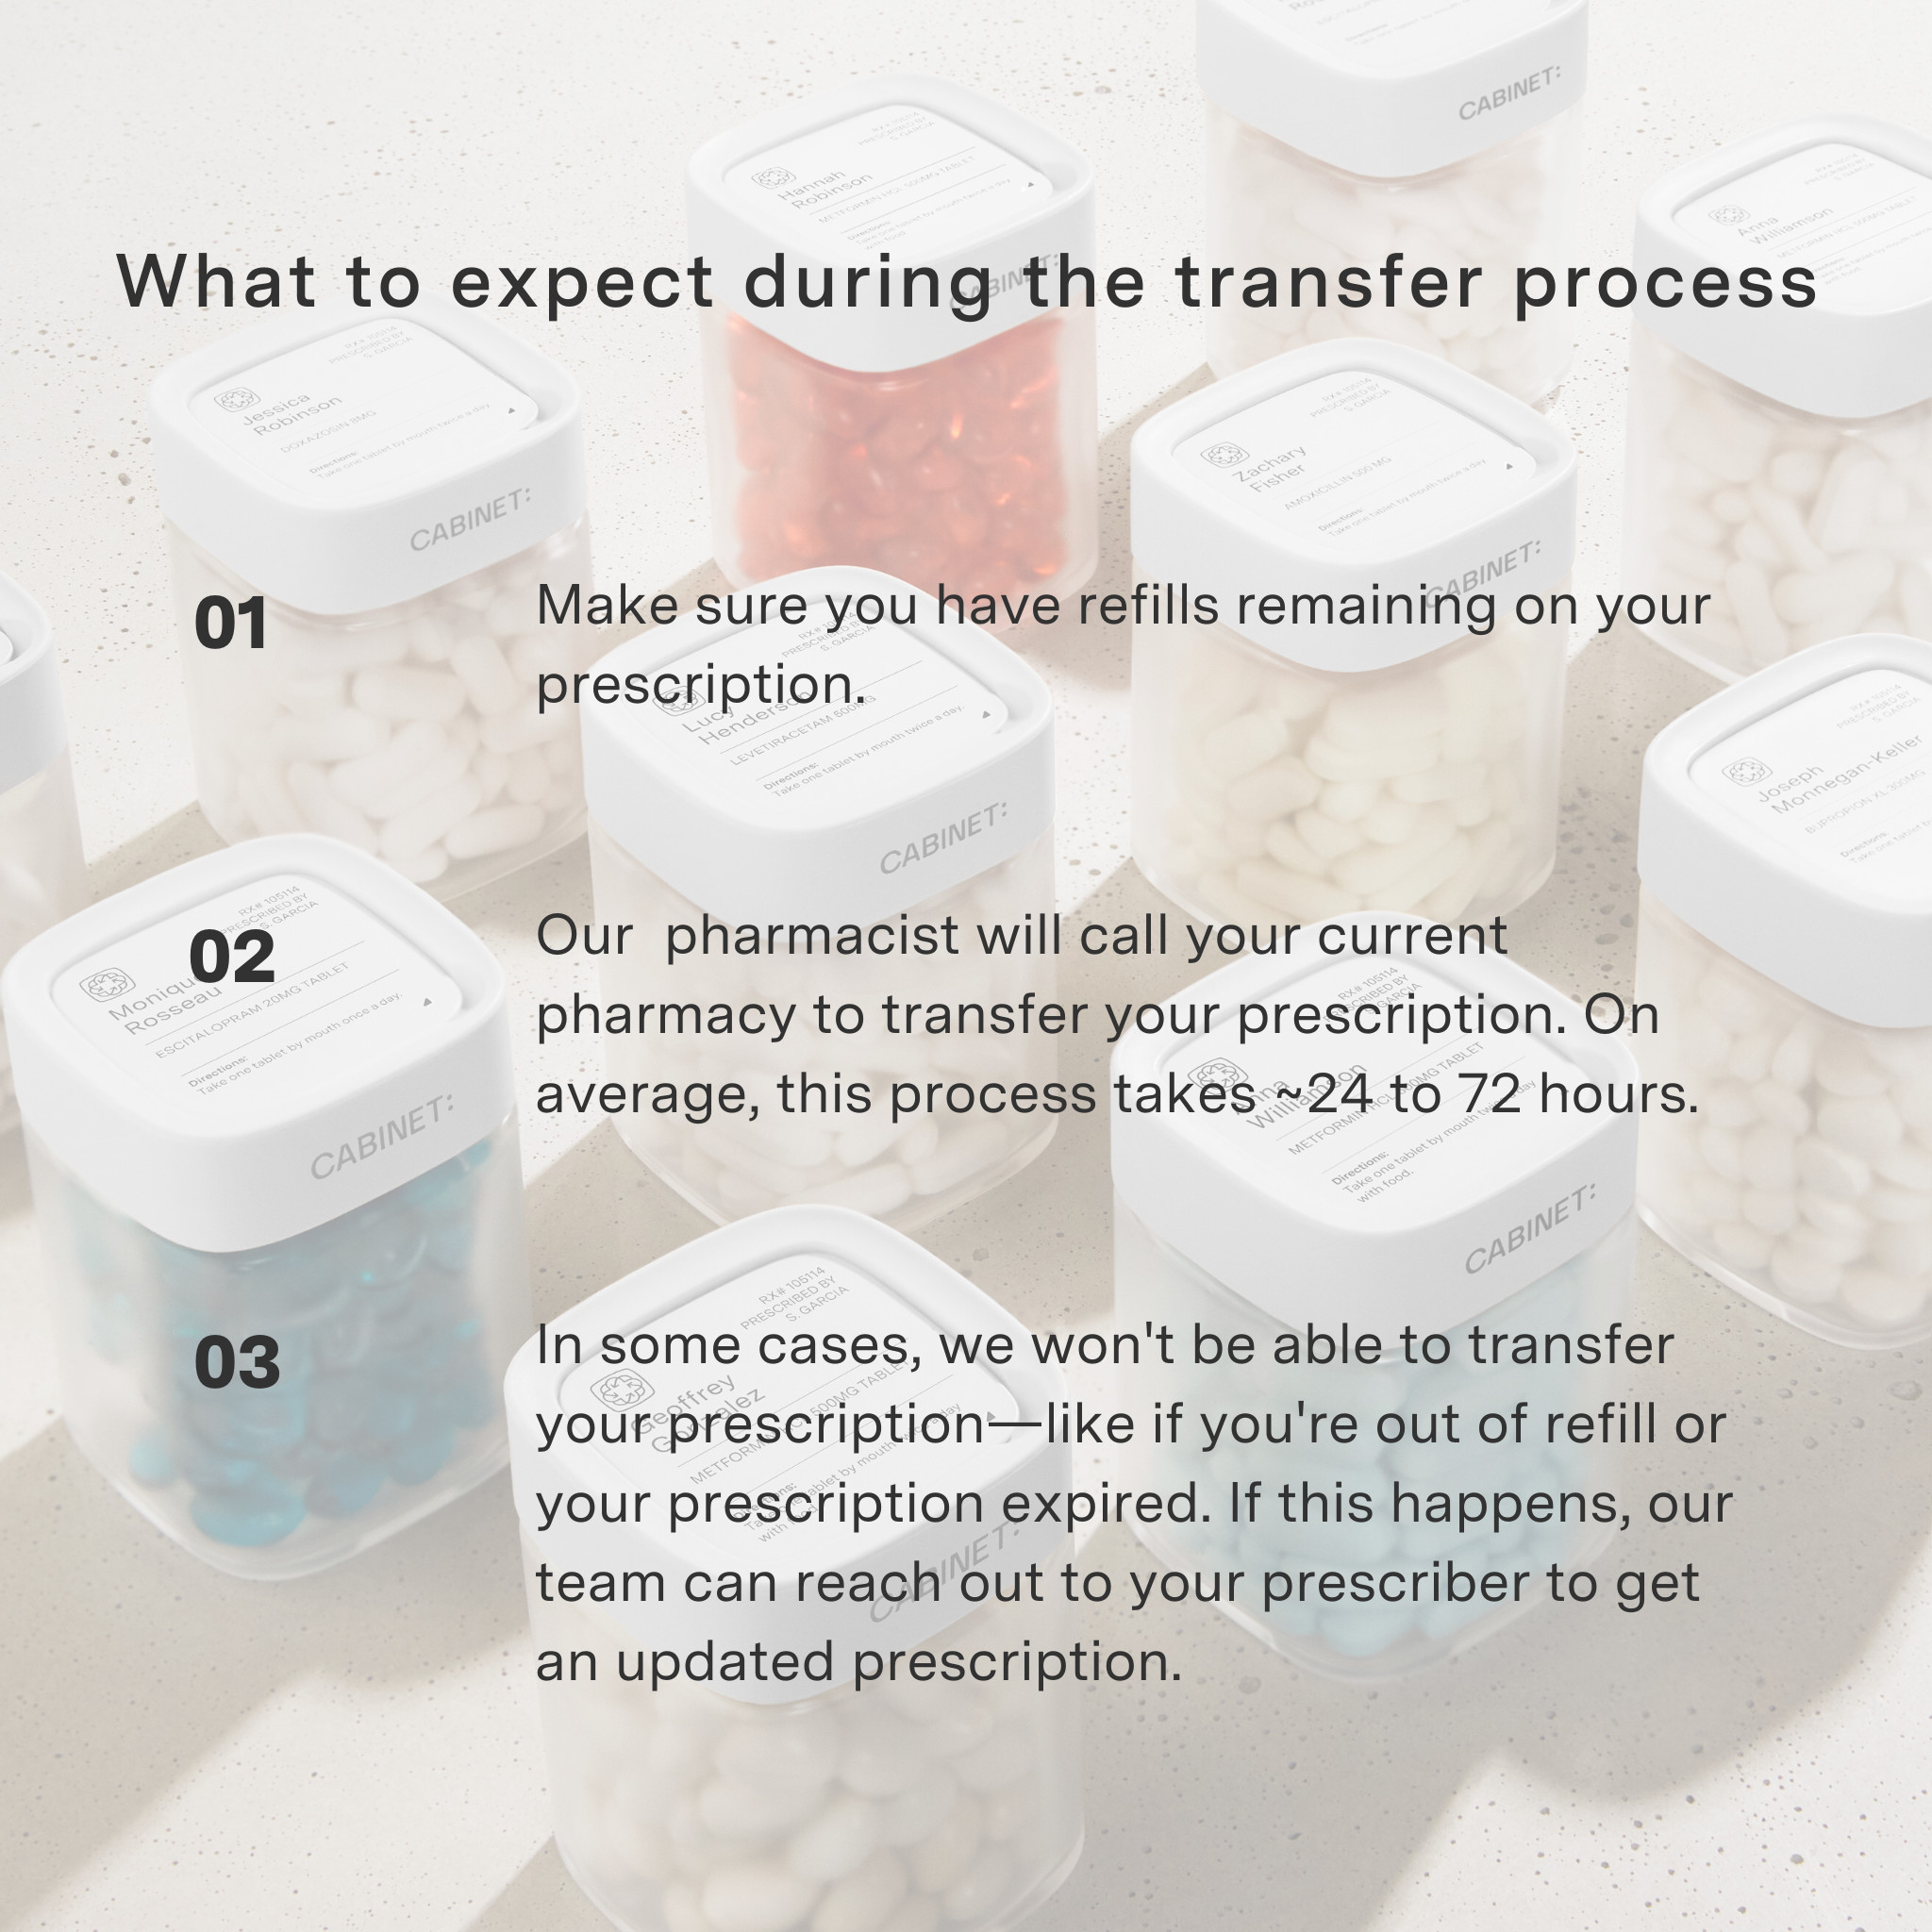 What to expect during the transfer process